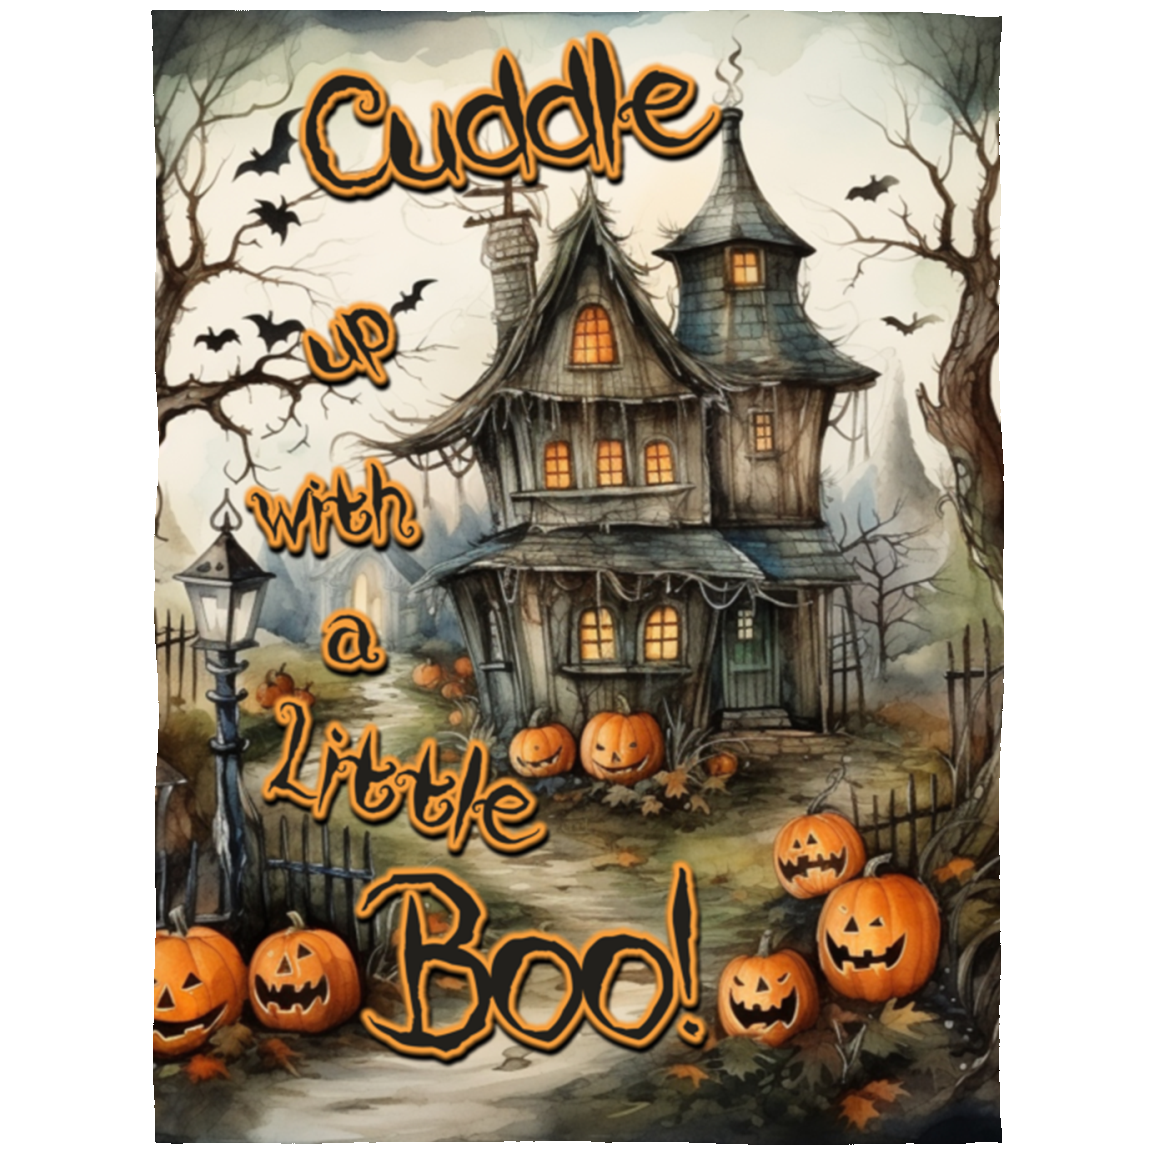 Cuddle Up with a Little Boo! - Spooky Halloween Blankets! - 60" x 80"